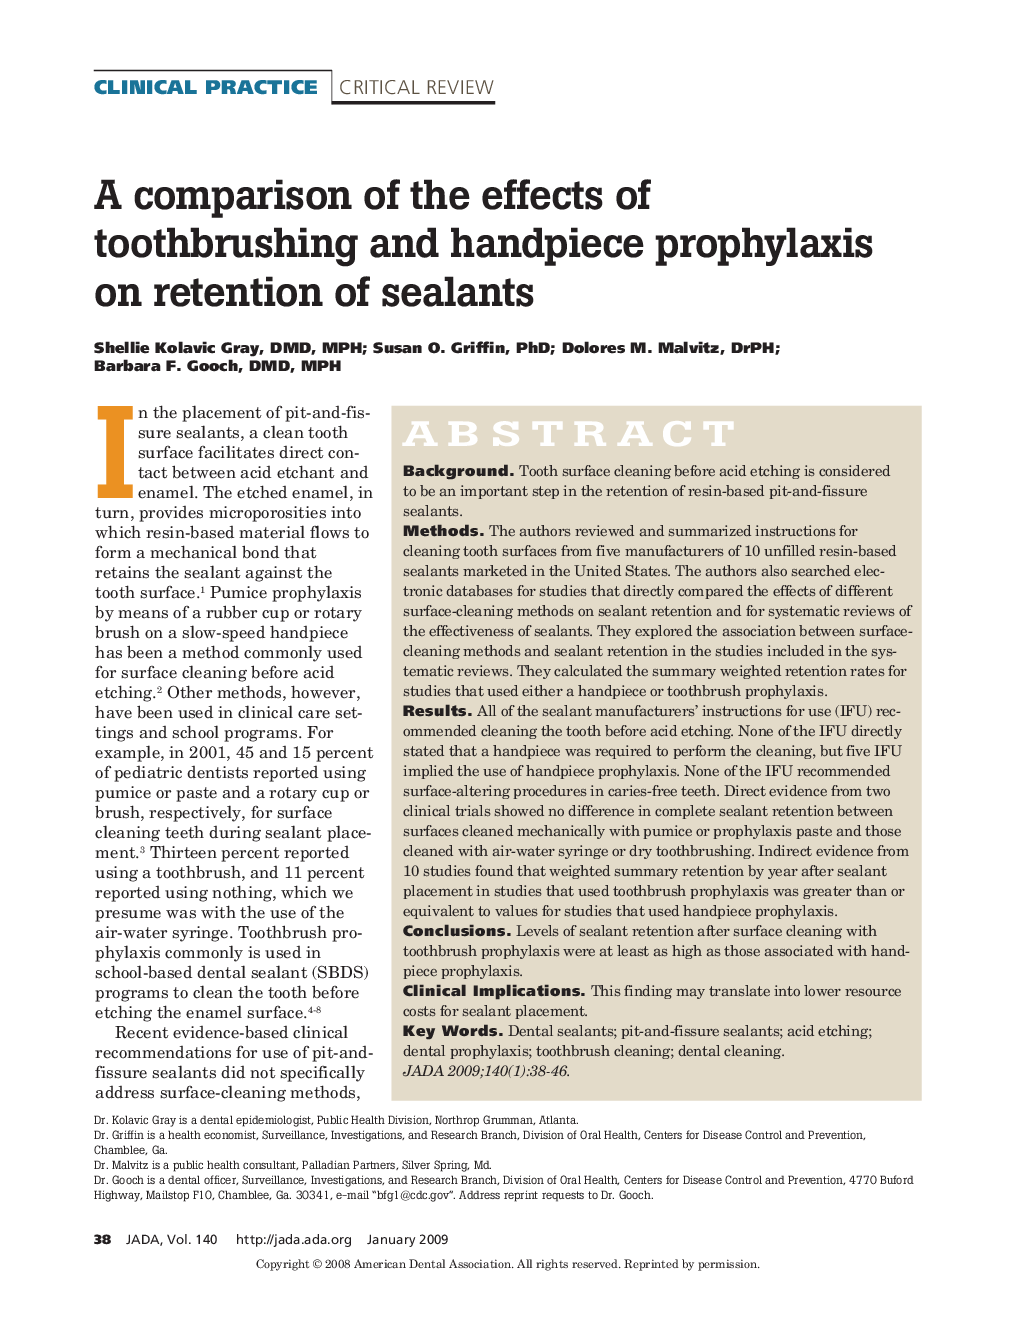 A comparison of the effects of toothbrushing and handpiece prophylaxis on retention of sealants 